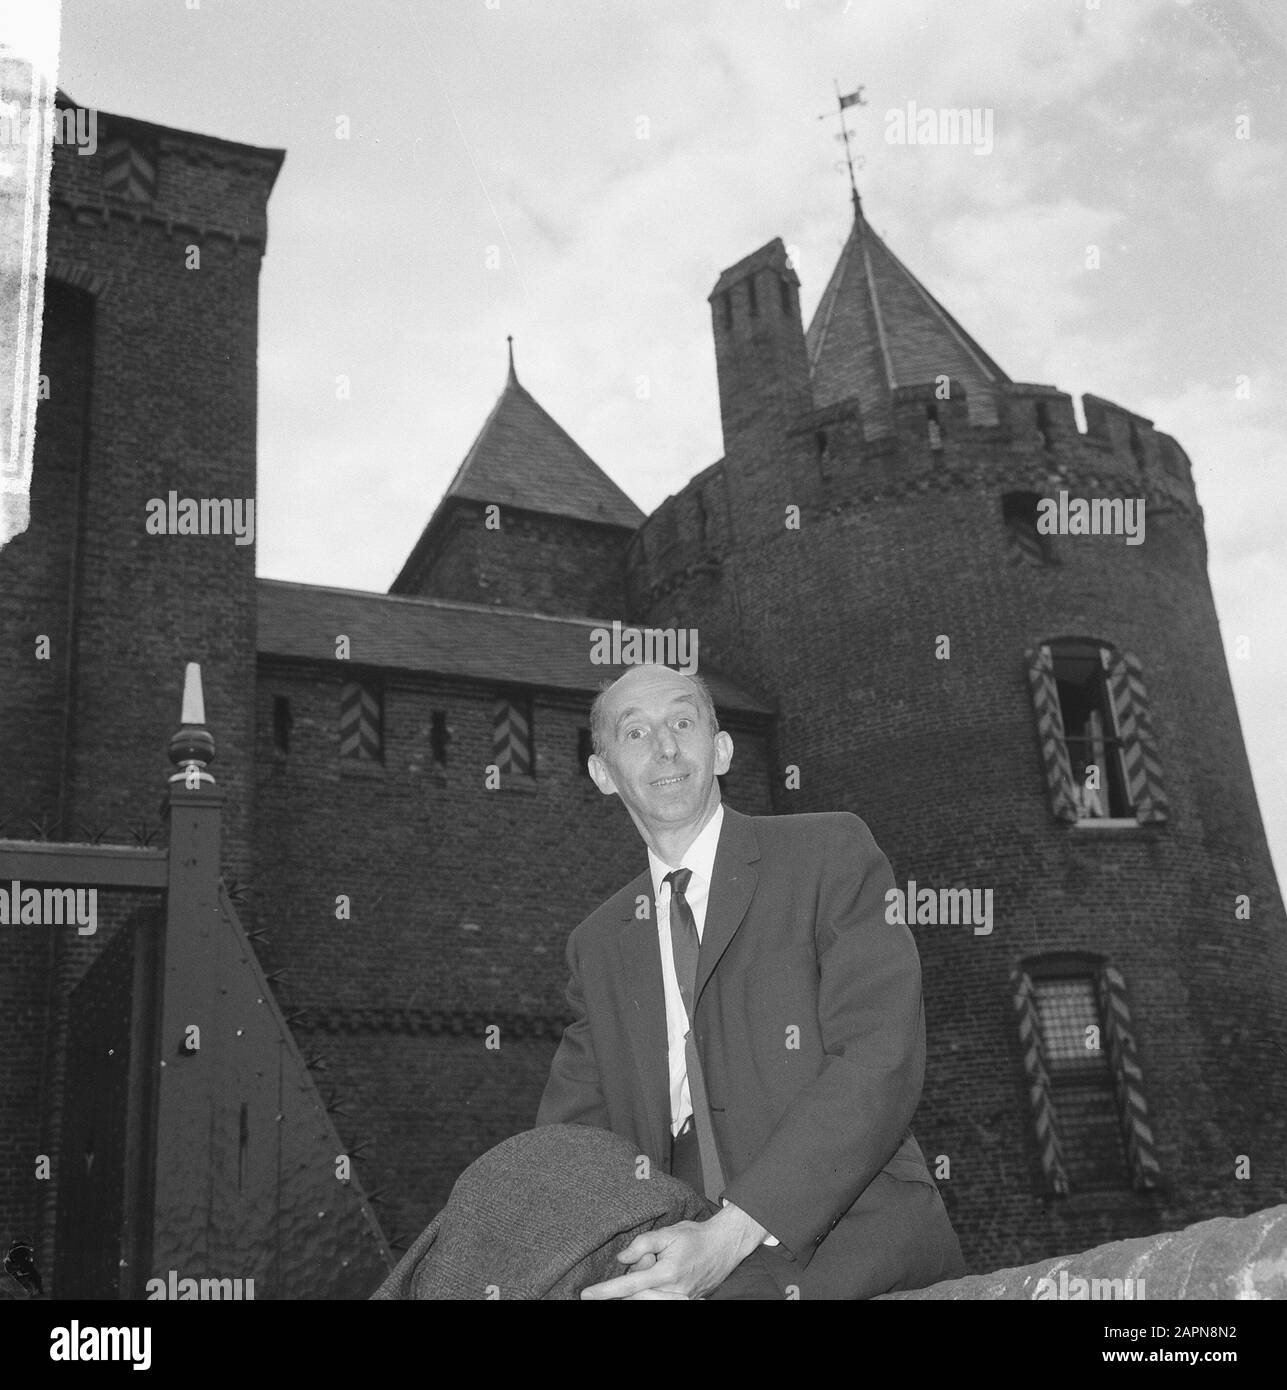 Leo Vroman received state award for literature in the Muiderslot Date: May 24, 1965 Keywords: prize winners Person name: Literature, Vroman, Leo Institution name: Muiderslot Stock Photo